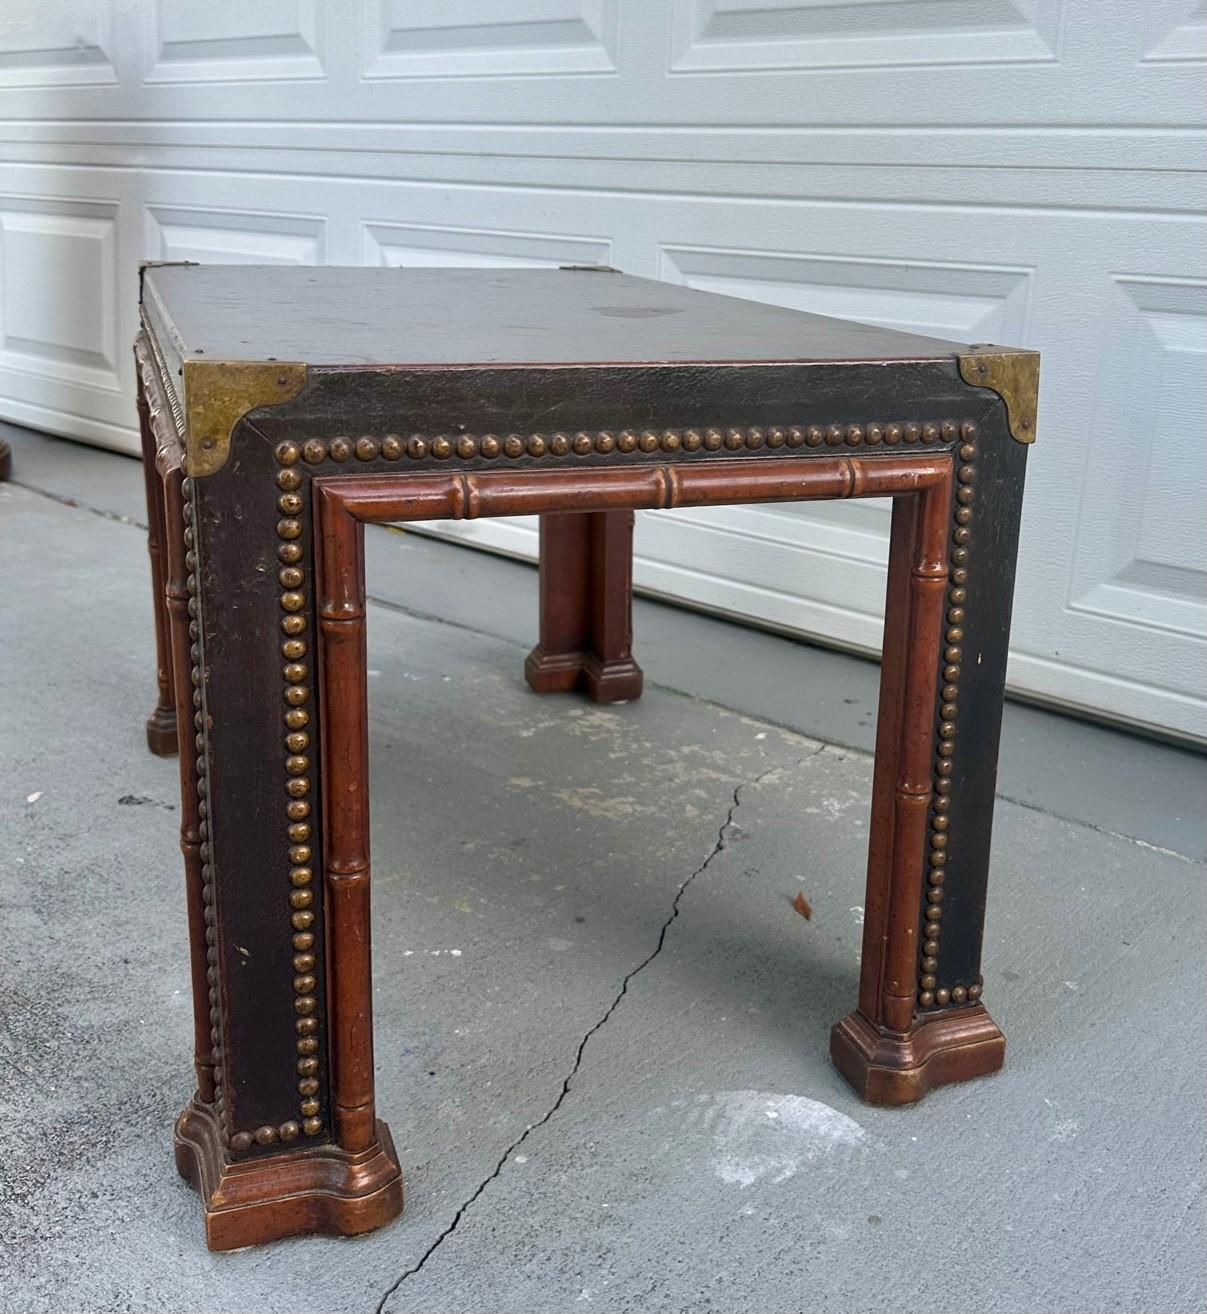 1960s Drexel ET Cetera Faux Bamboo Leather Wrapped Chinoiserie Coffee or Side Parsons Table

The vintage brown leather wrapped brass nail head studded side or coffee table was made in the 1960s. This quality leather covered parsons table in faux